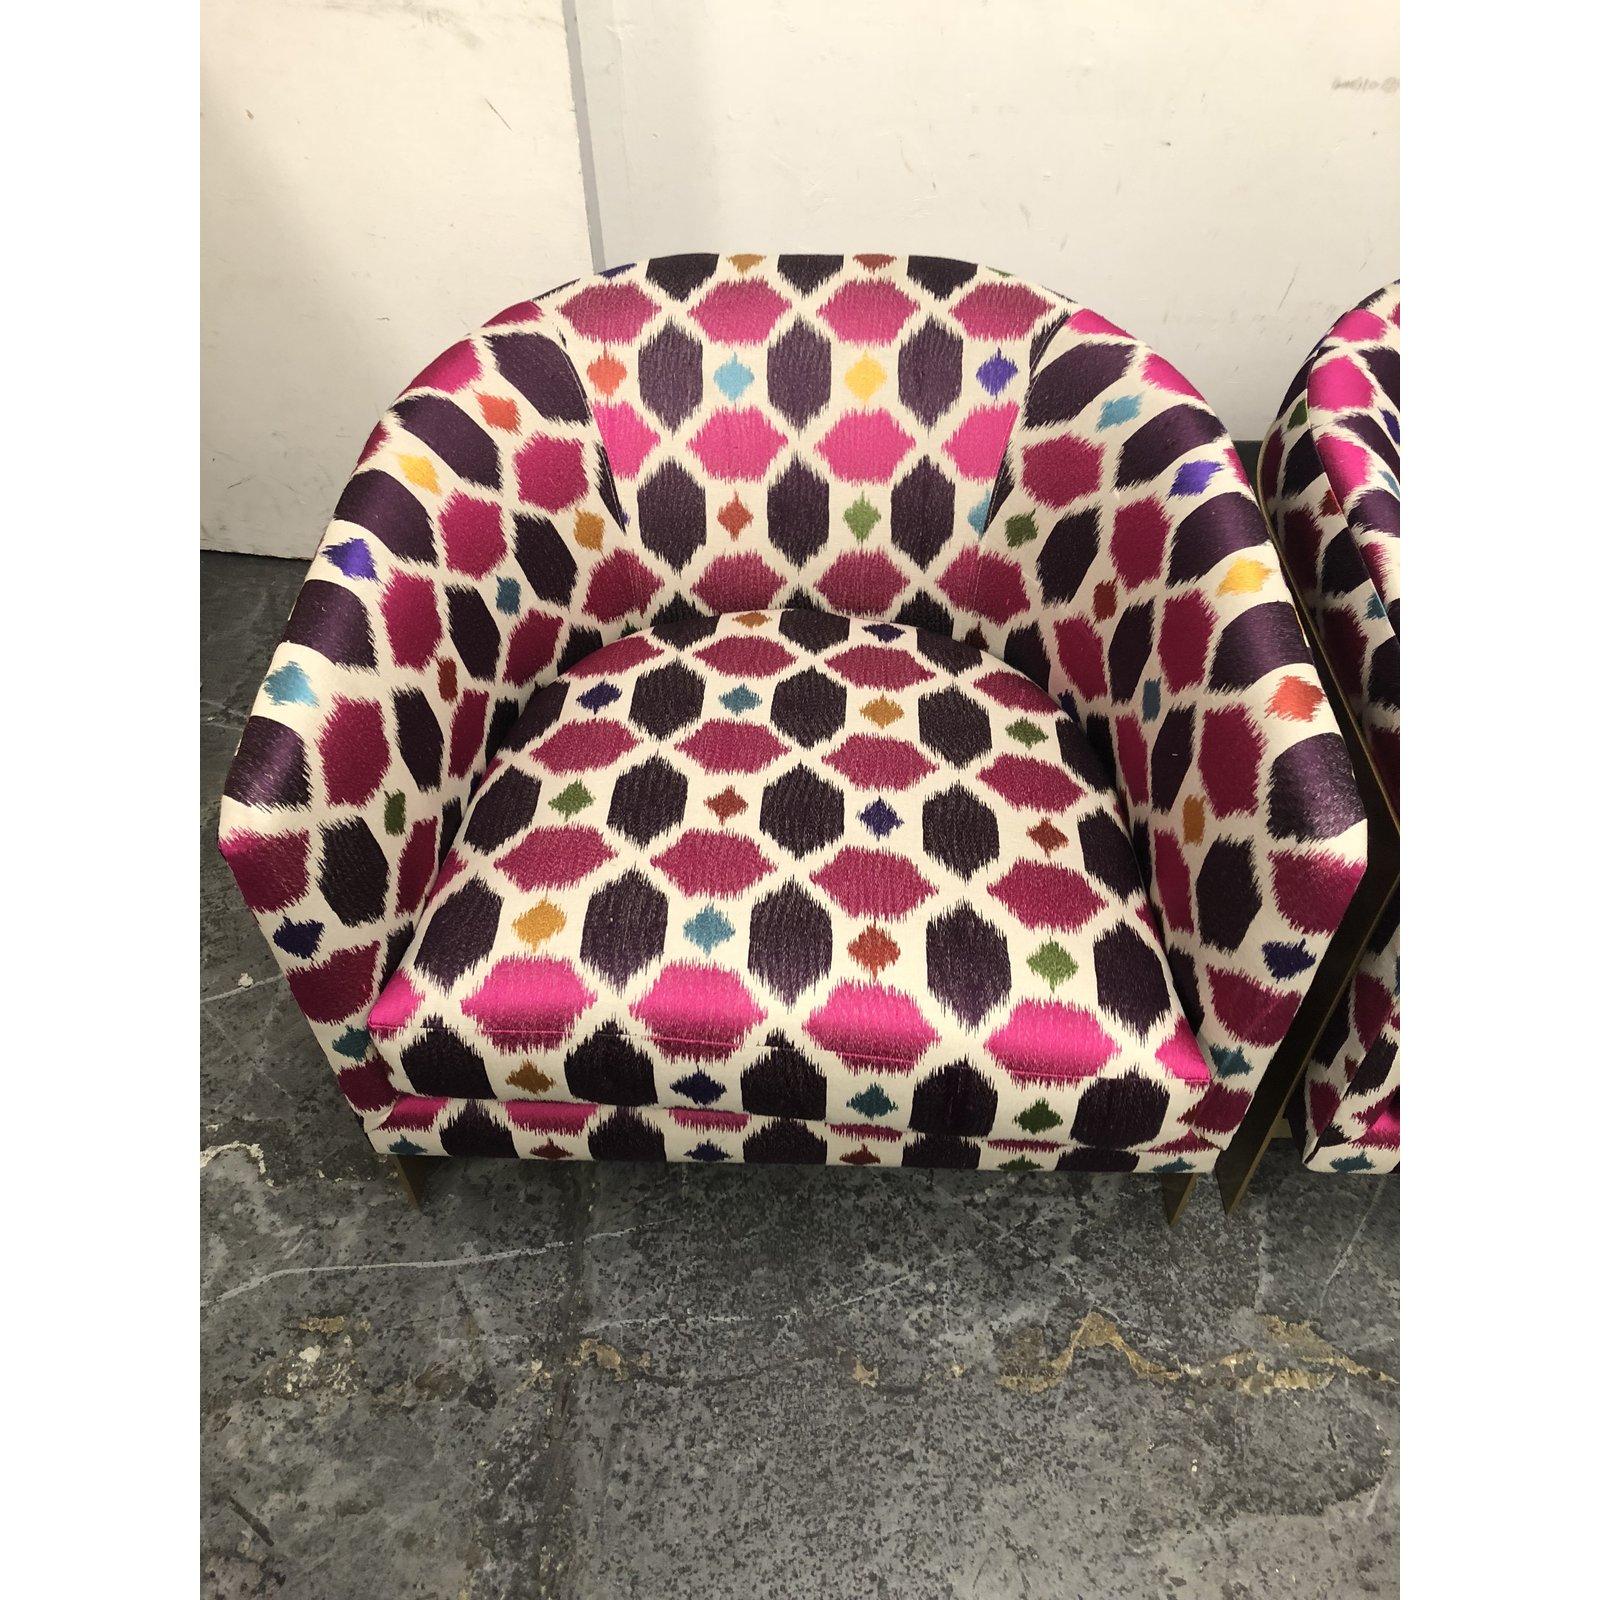 Pair of Nathan Anthony Korz Chair by Tina Nicole and Kravet Fabric im Angebot 2